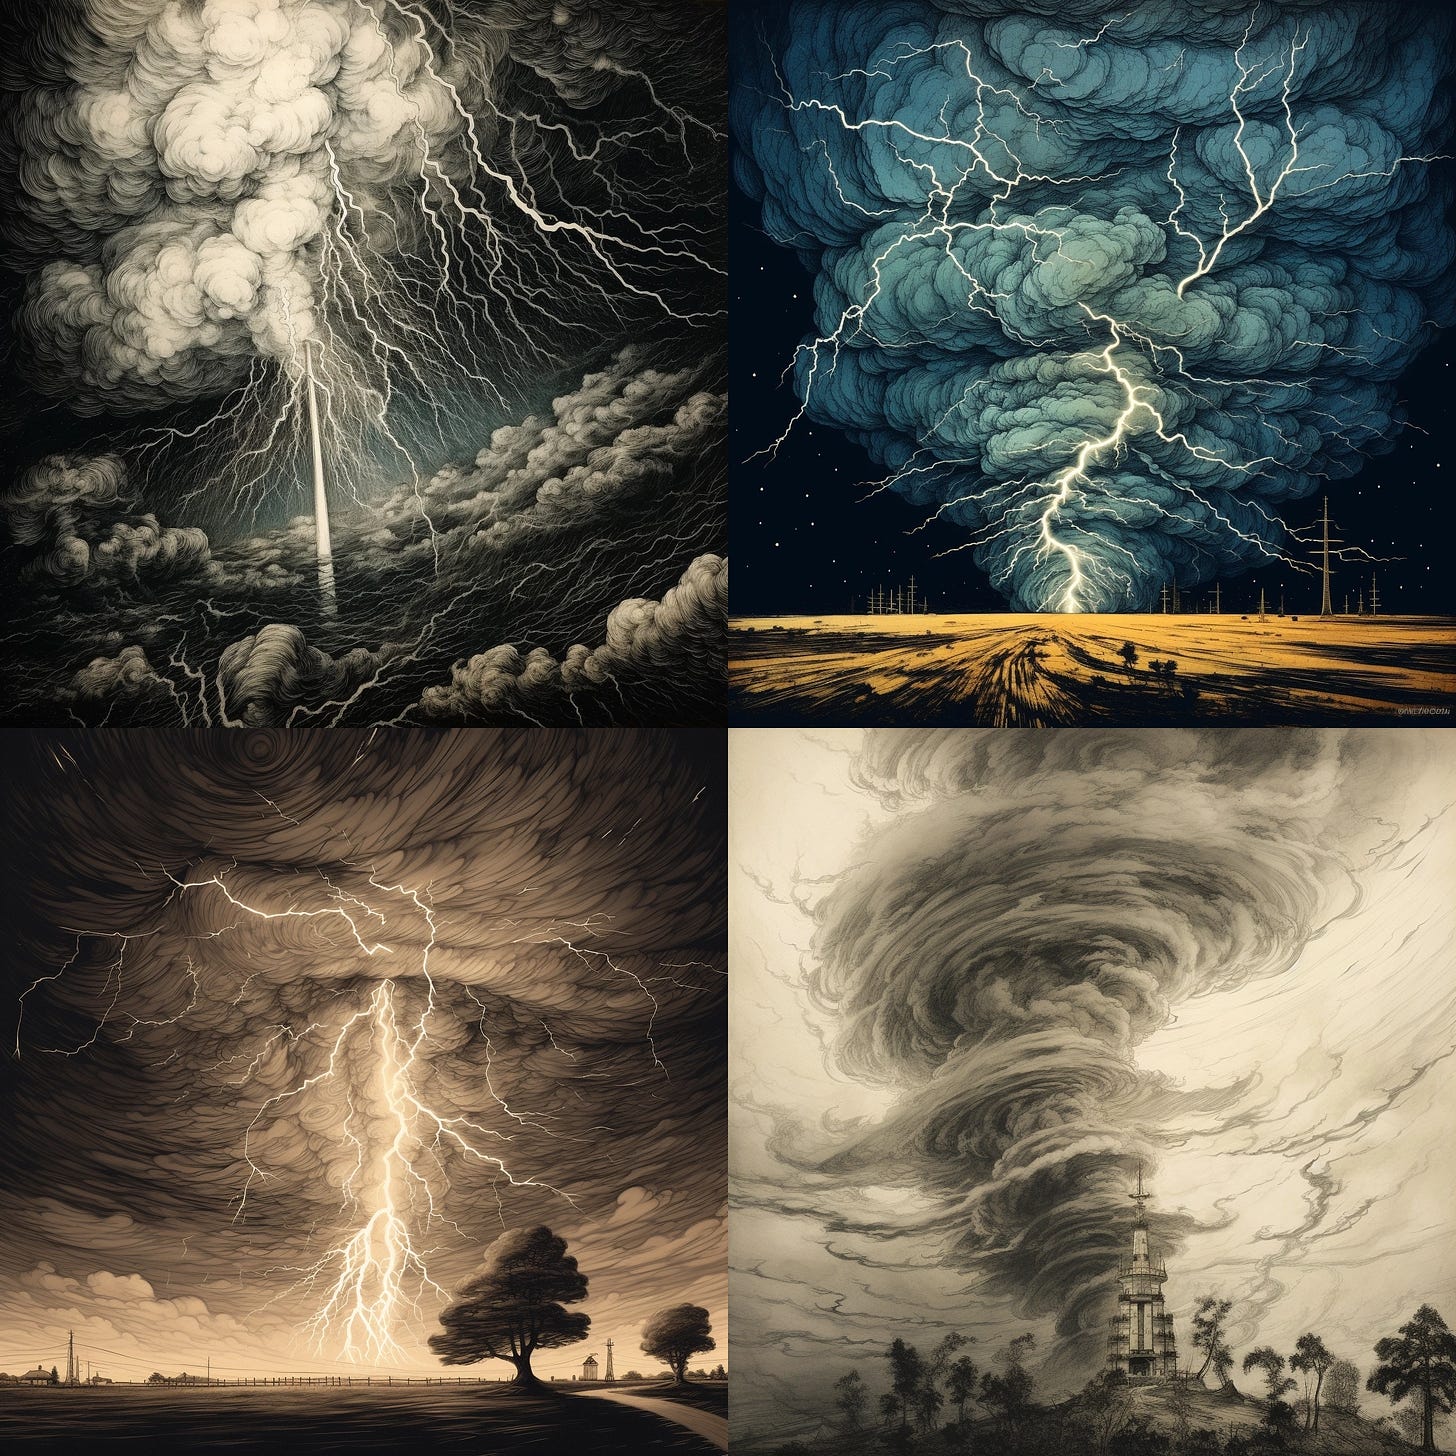 Four images: one of a grey thundercloud with lightning bolts coming down into a second row of clouds; one of a blue cloud with a thunderbolts descending onto a yellow field; one of a sepia-toned drawing with a house in a field and a thundercloud, and one of a twister with a lighthouse beneath it.